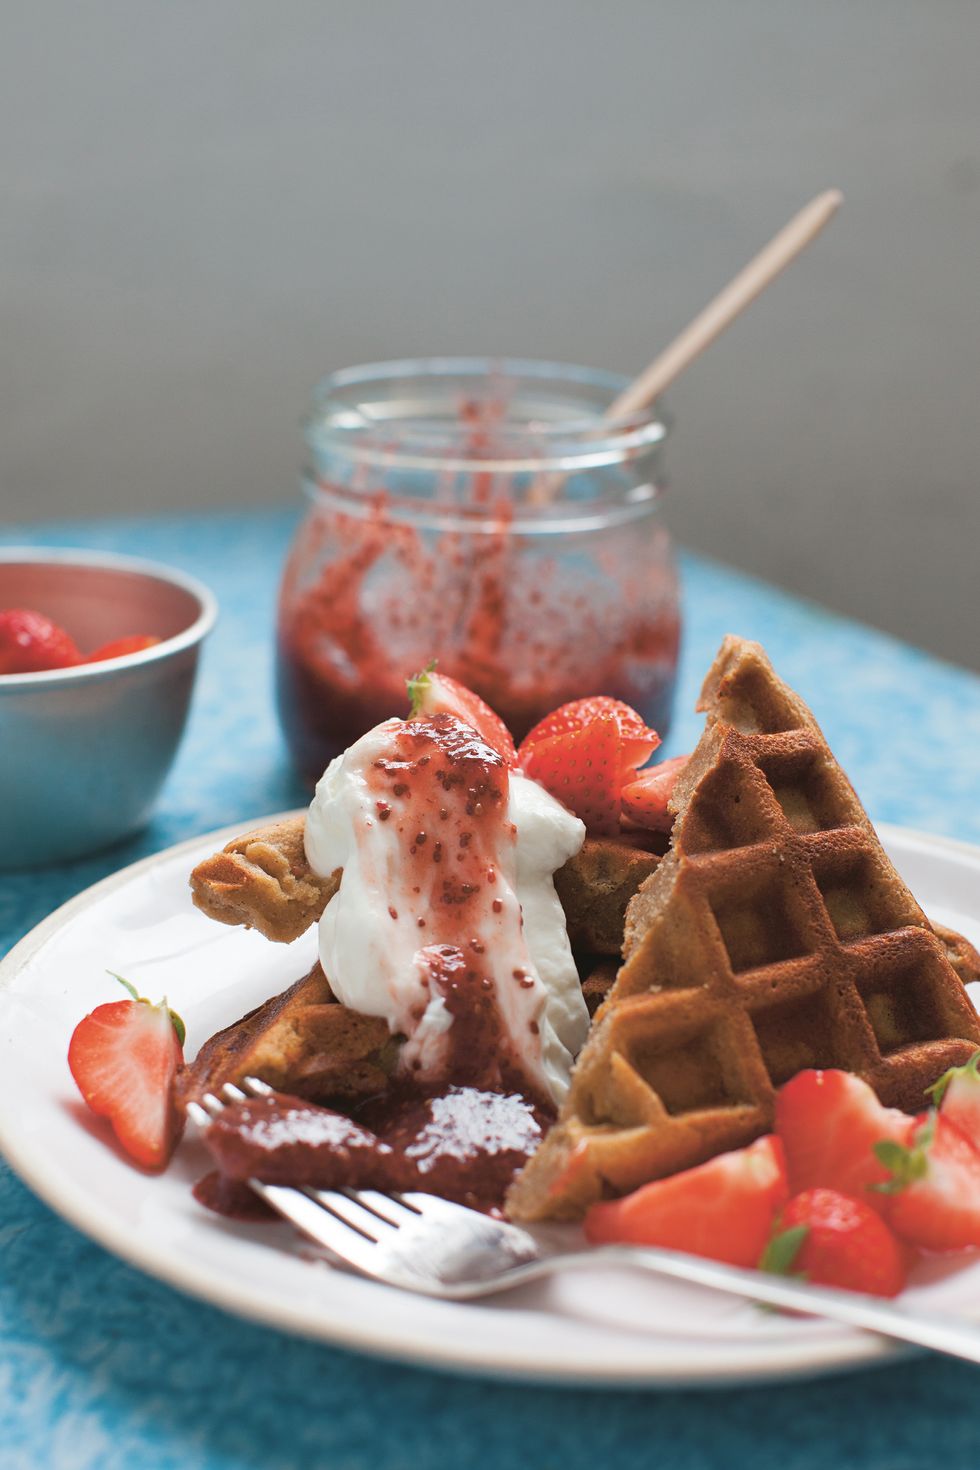 the good life eatery's chestnut and almond waffles with strawberry chia jam